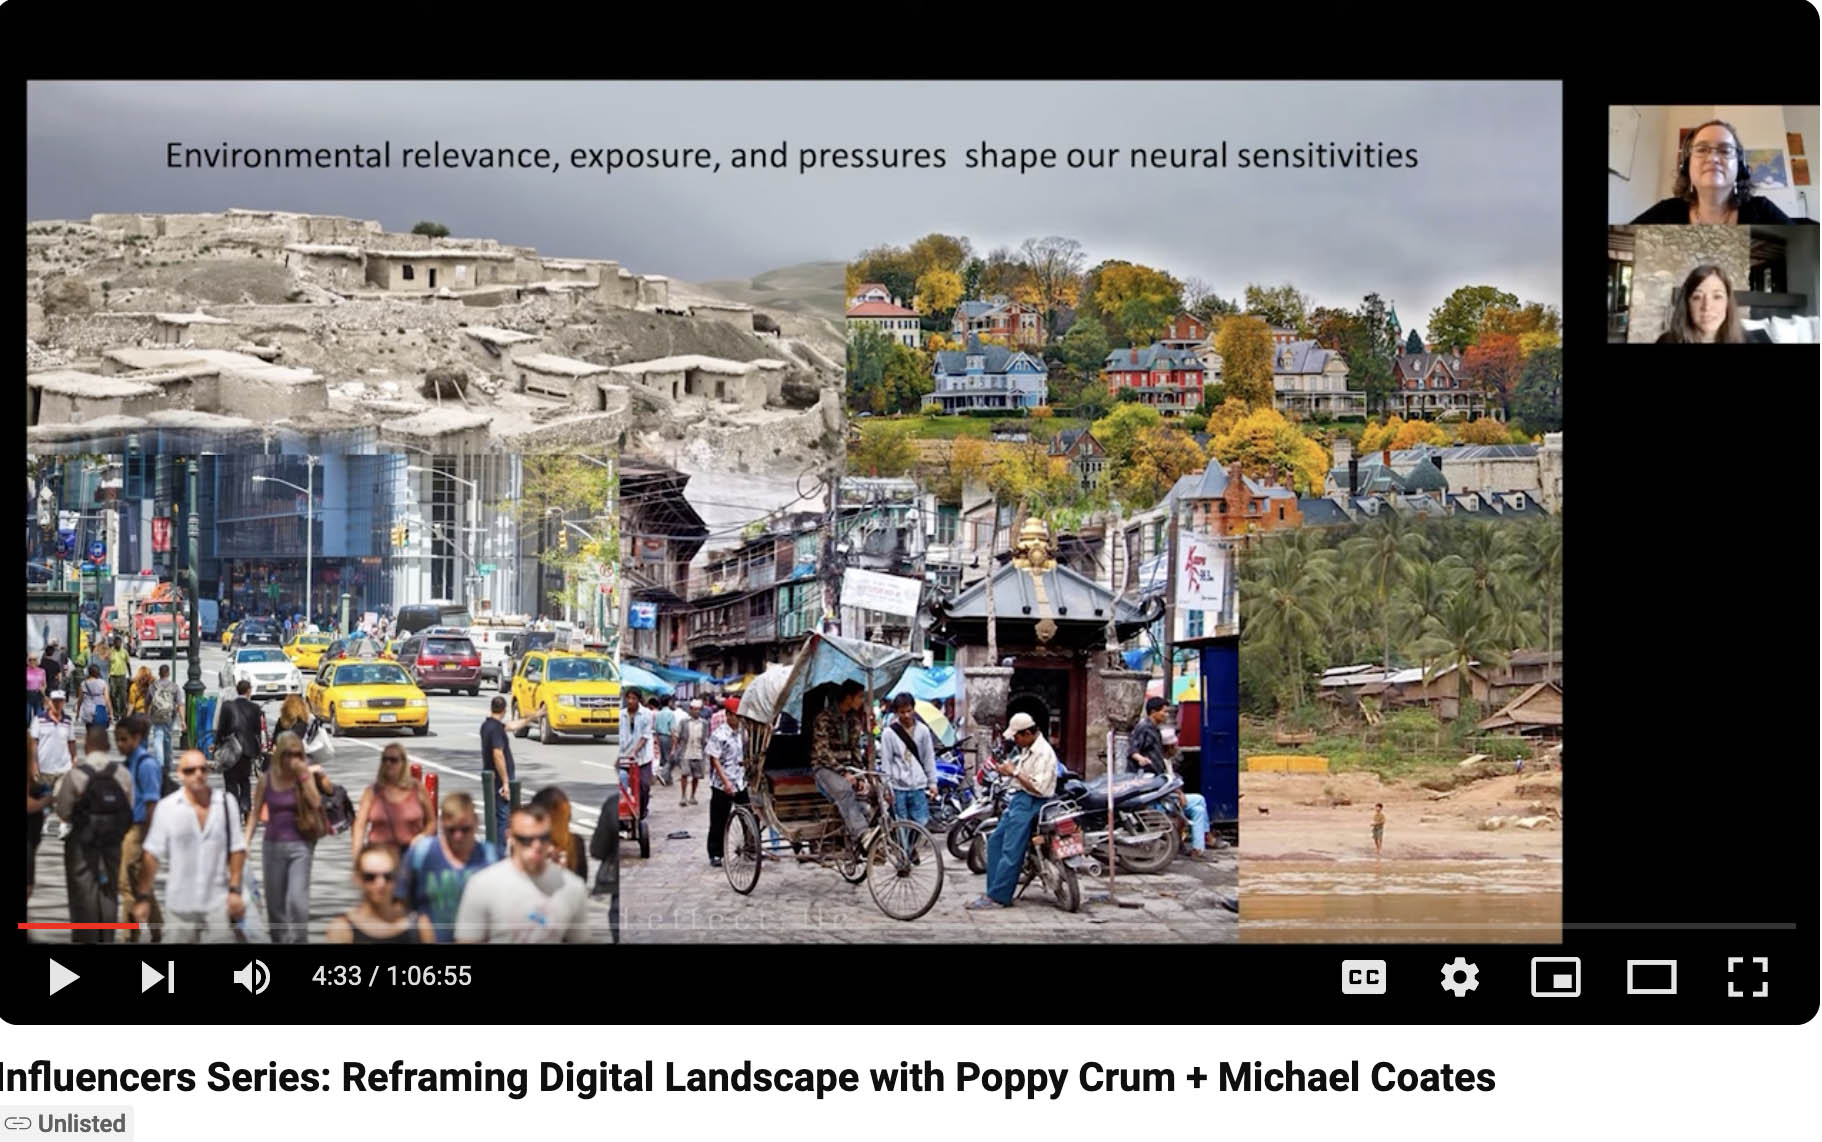 Influencer Series: Reframing Digital Landscape with Poppy Crum + Michael Coates